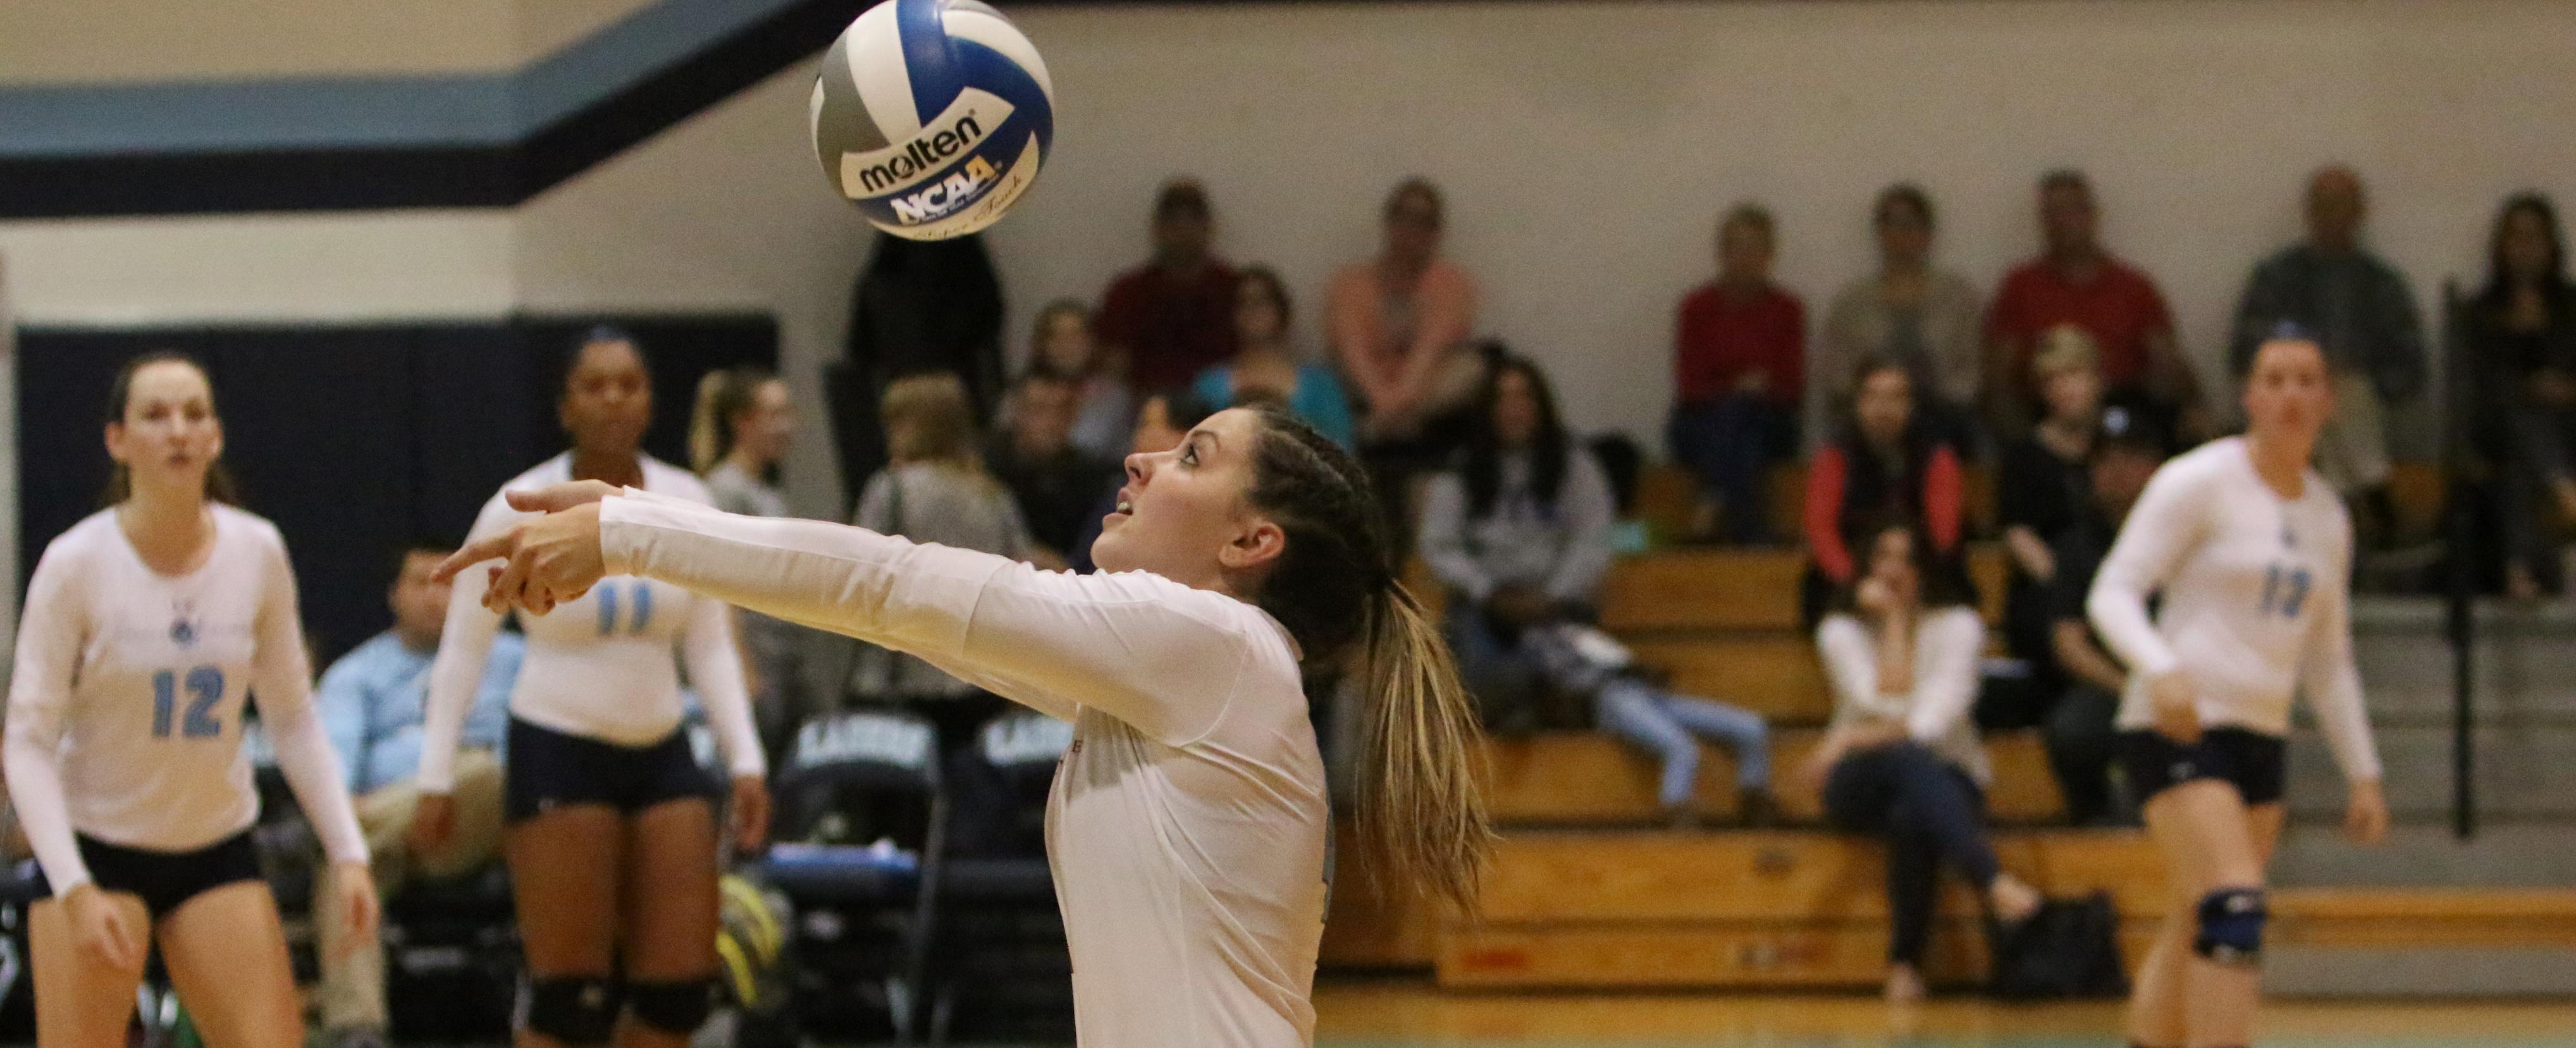 Women's Volleyball Goes 1-3 in Saratoga Springs; Tiezzi Hits 2,500 Assists